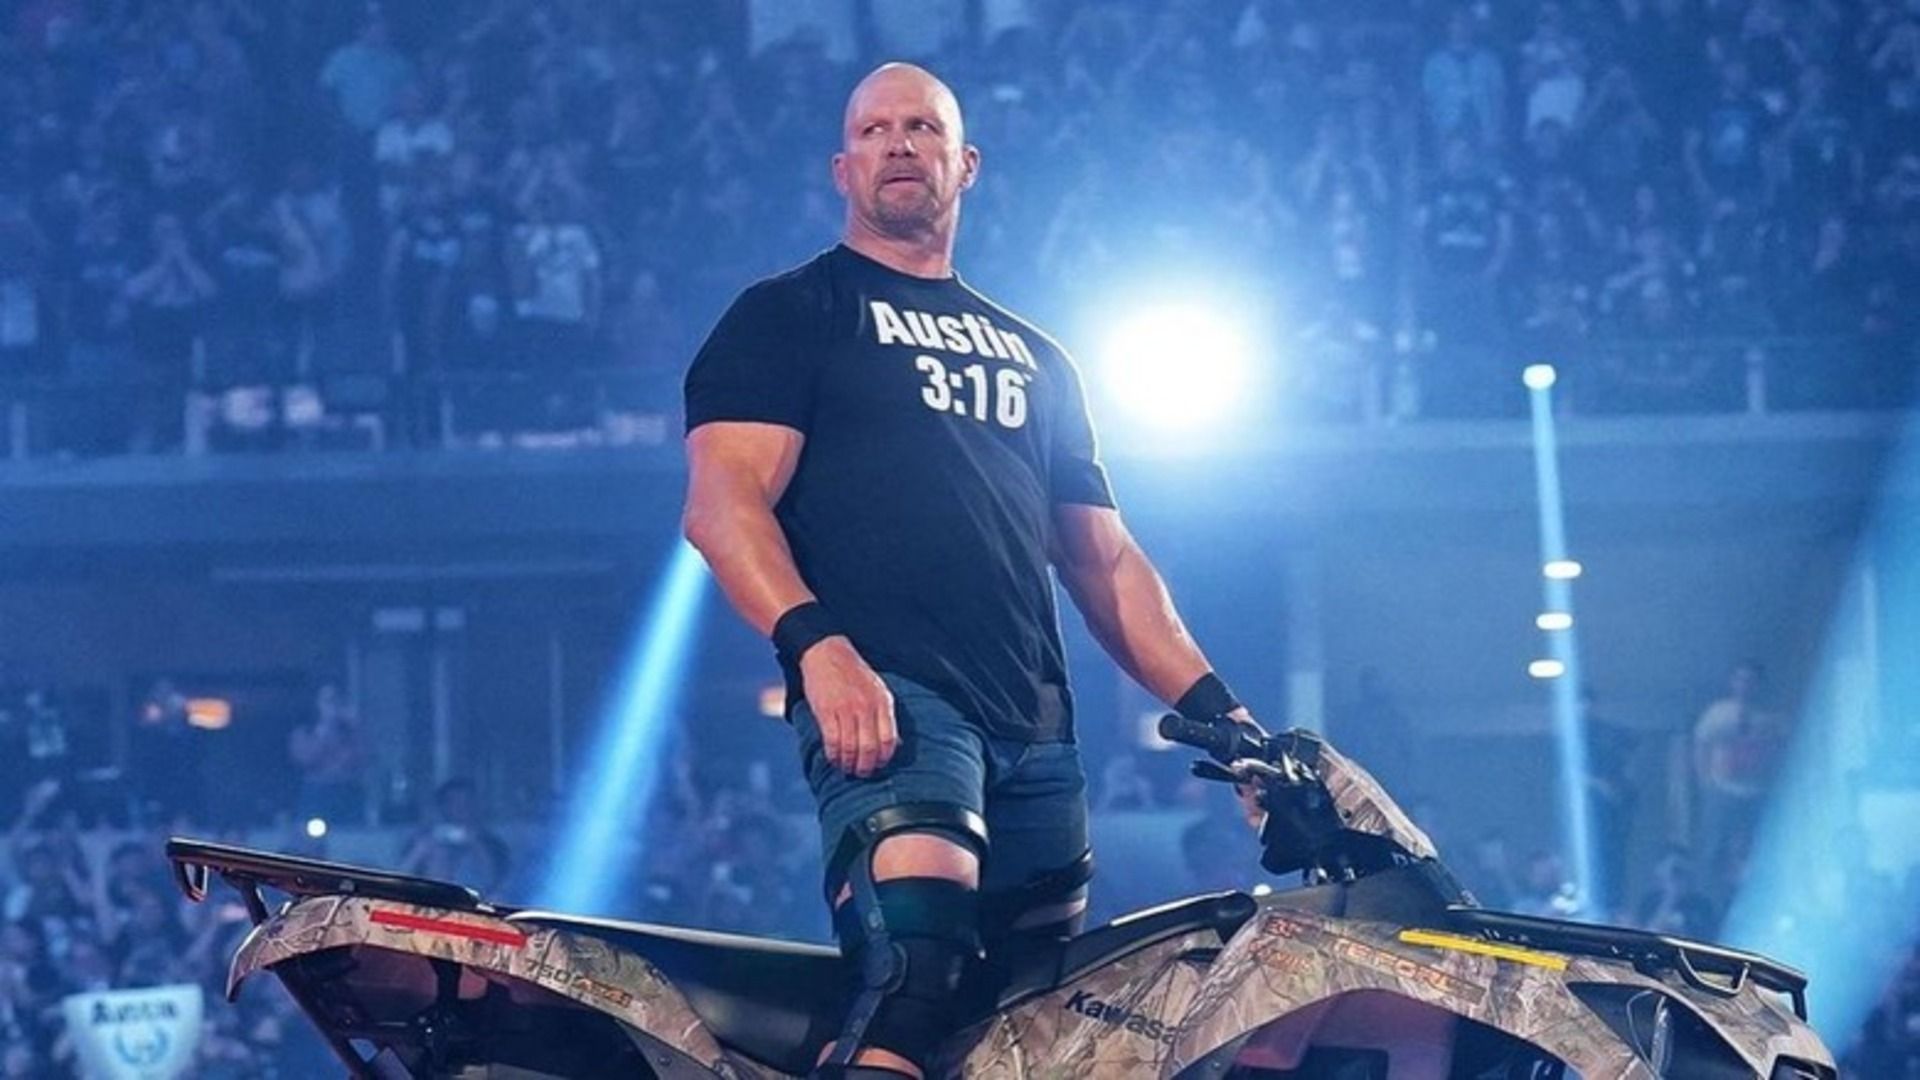 Stone Cold Steve Austin had a terrific showing at WWE WrestleMania 38.